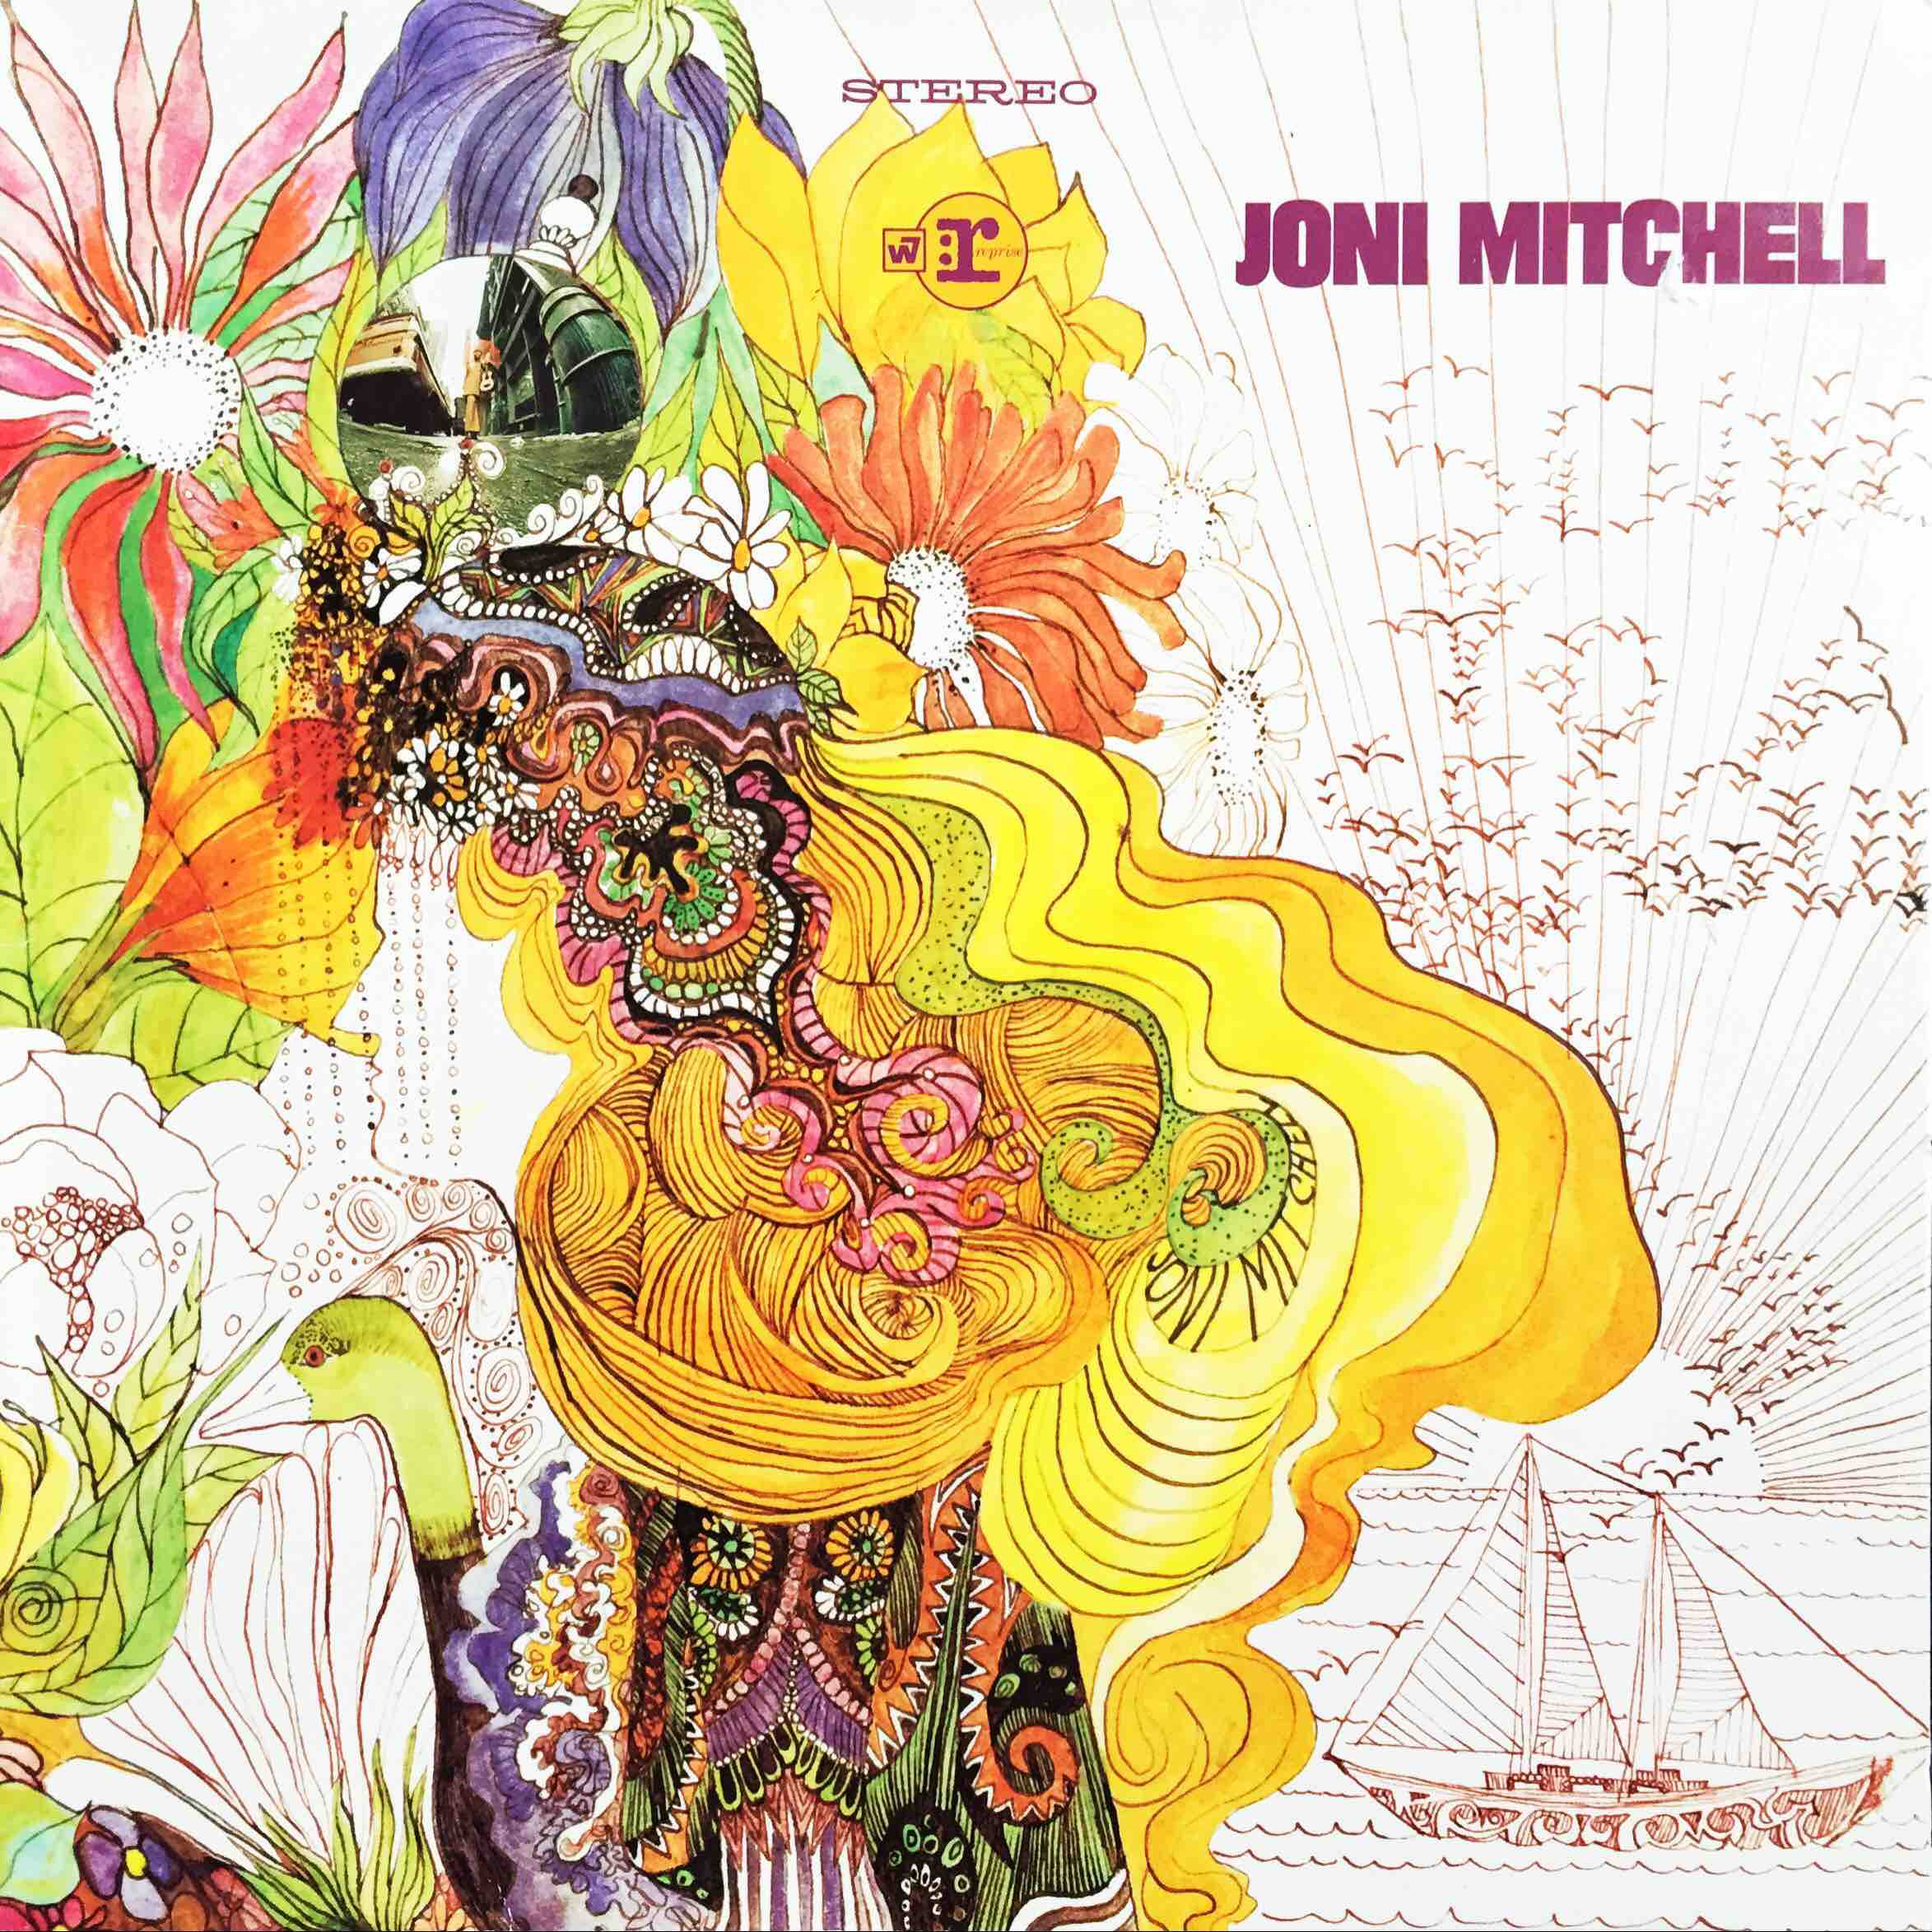 Joni Mitchell: Song To A Seagull (1968).